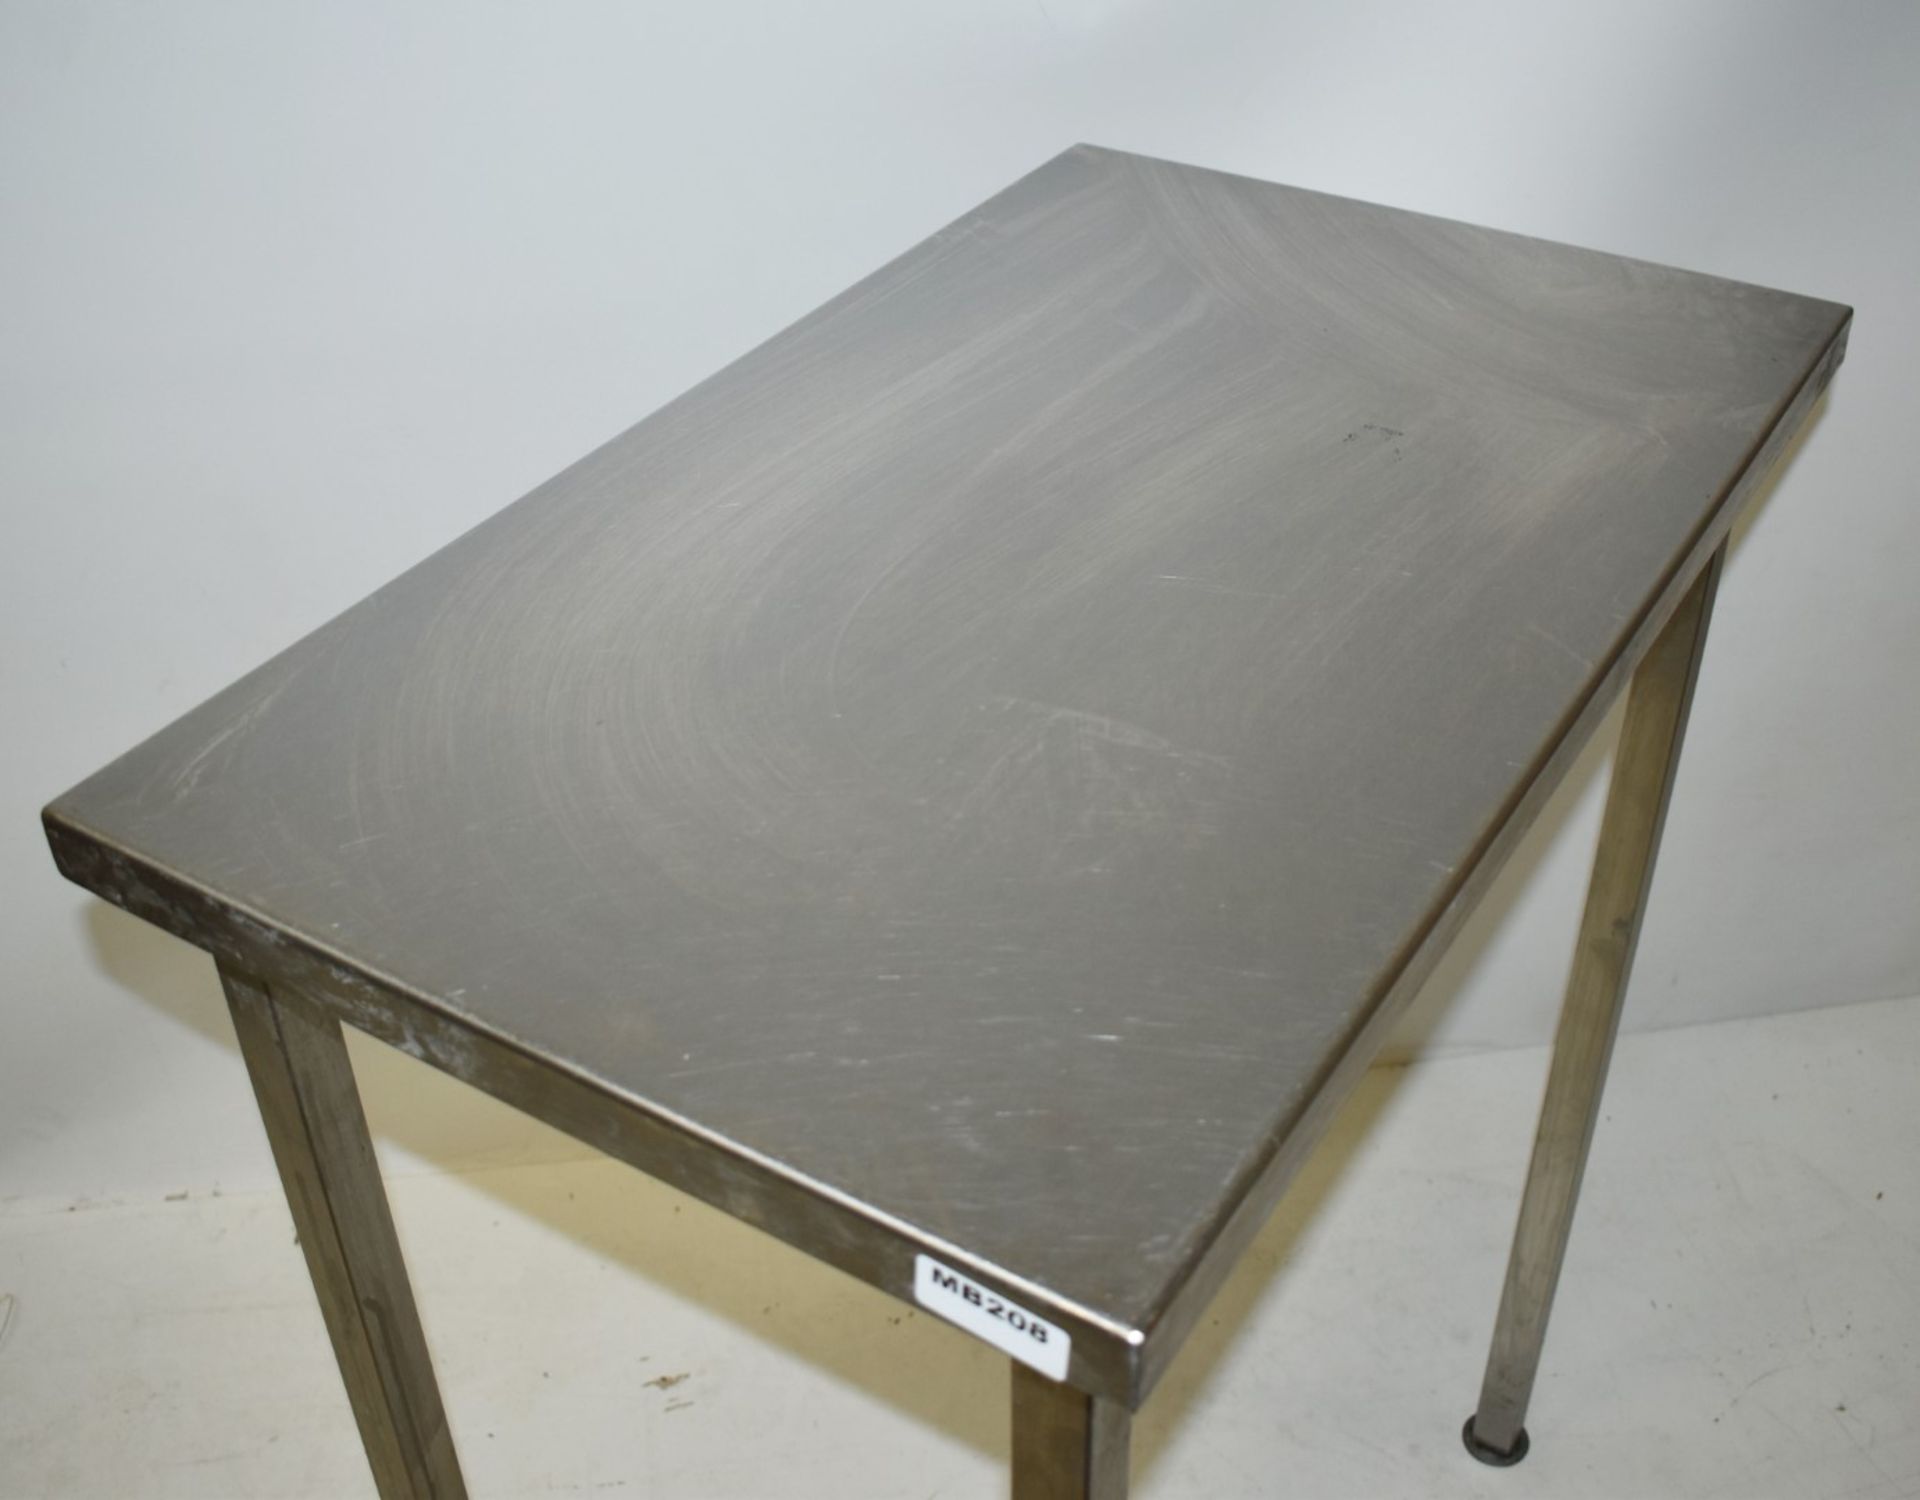 1 x Stainless Steel Fill In Prep Bench - H90 x W46 x D76 cms - CL453 - Ref MB208 - Location: - Image 2 of 2